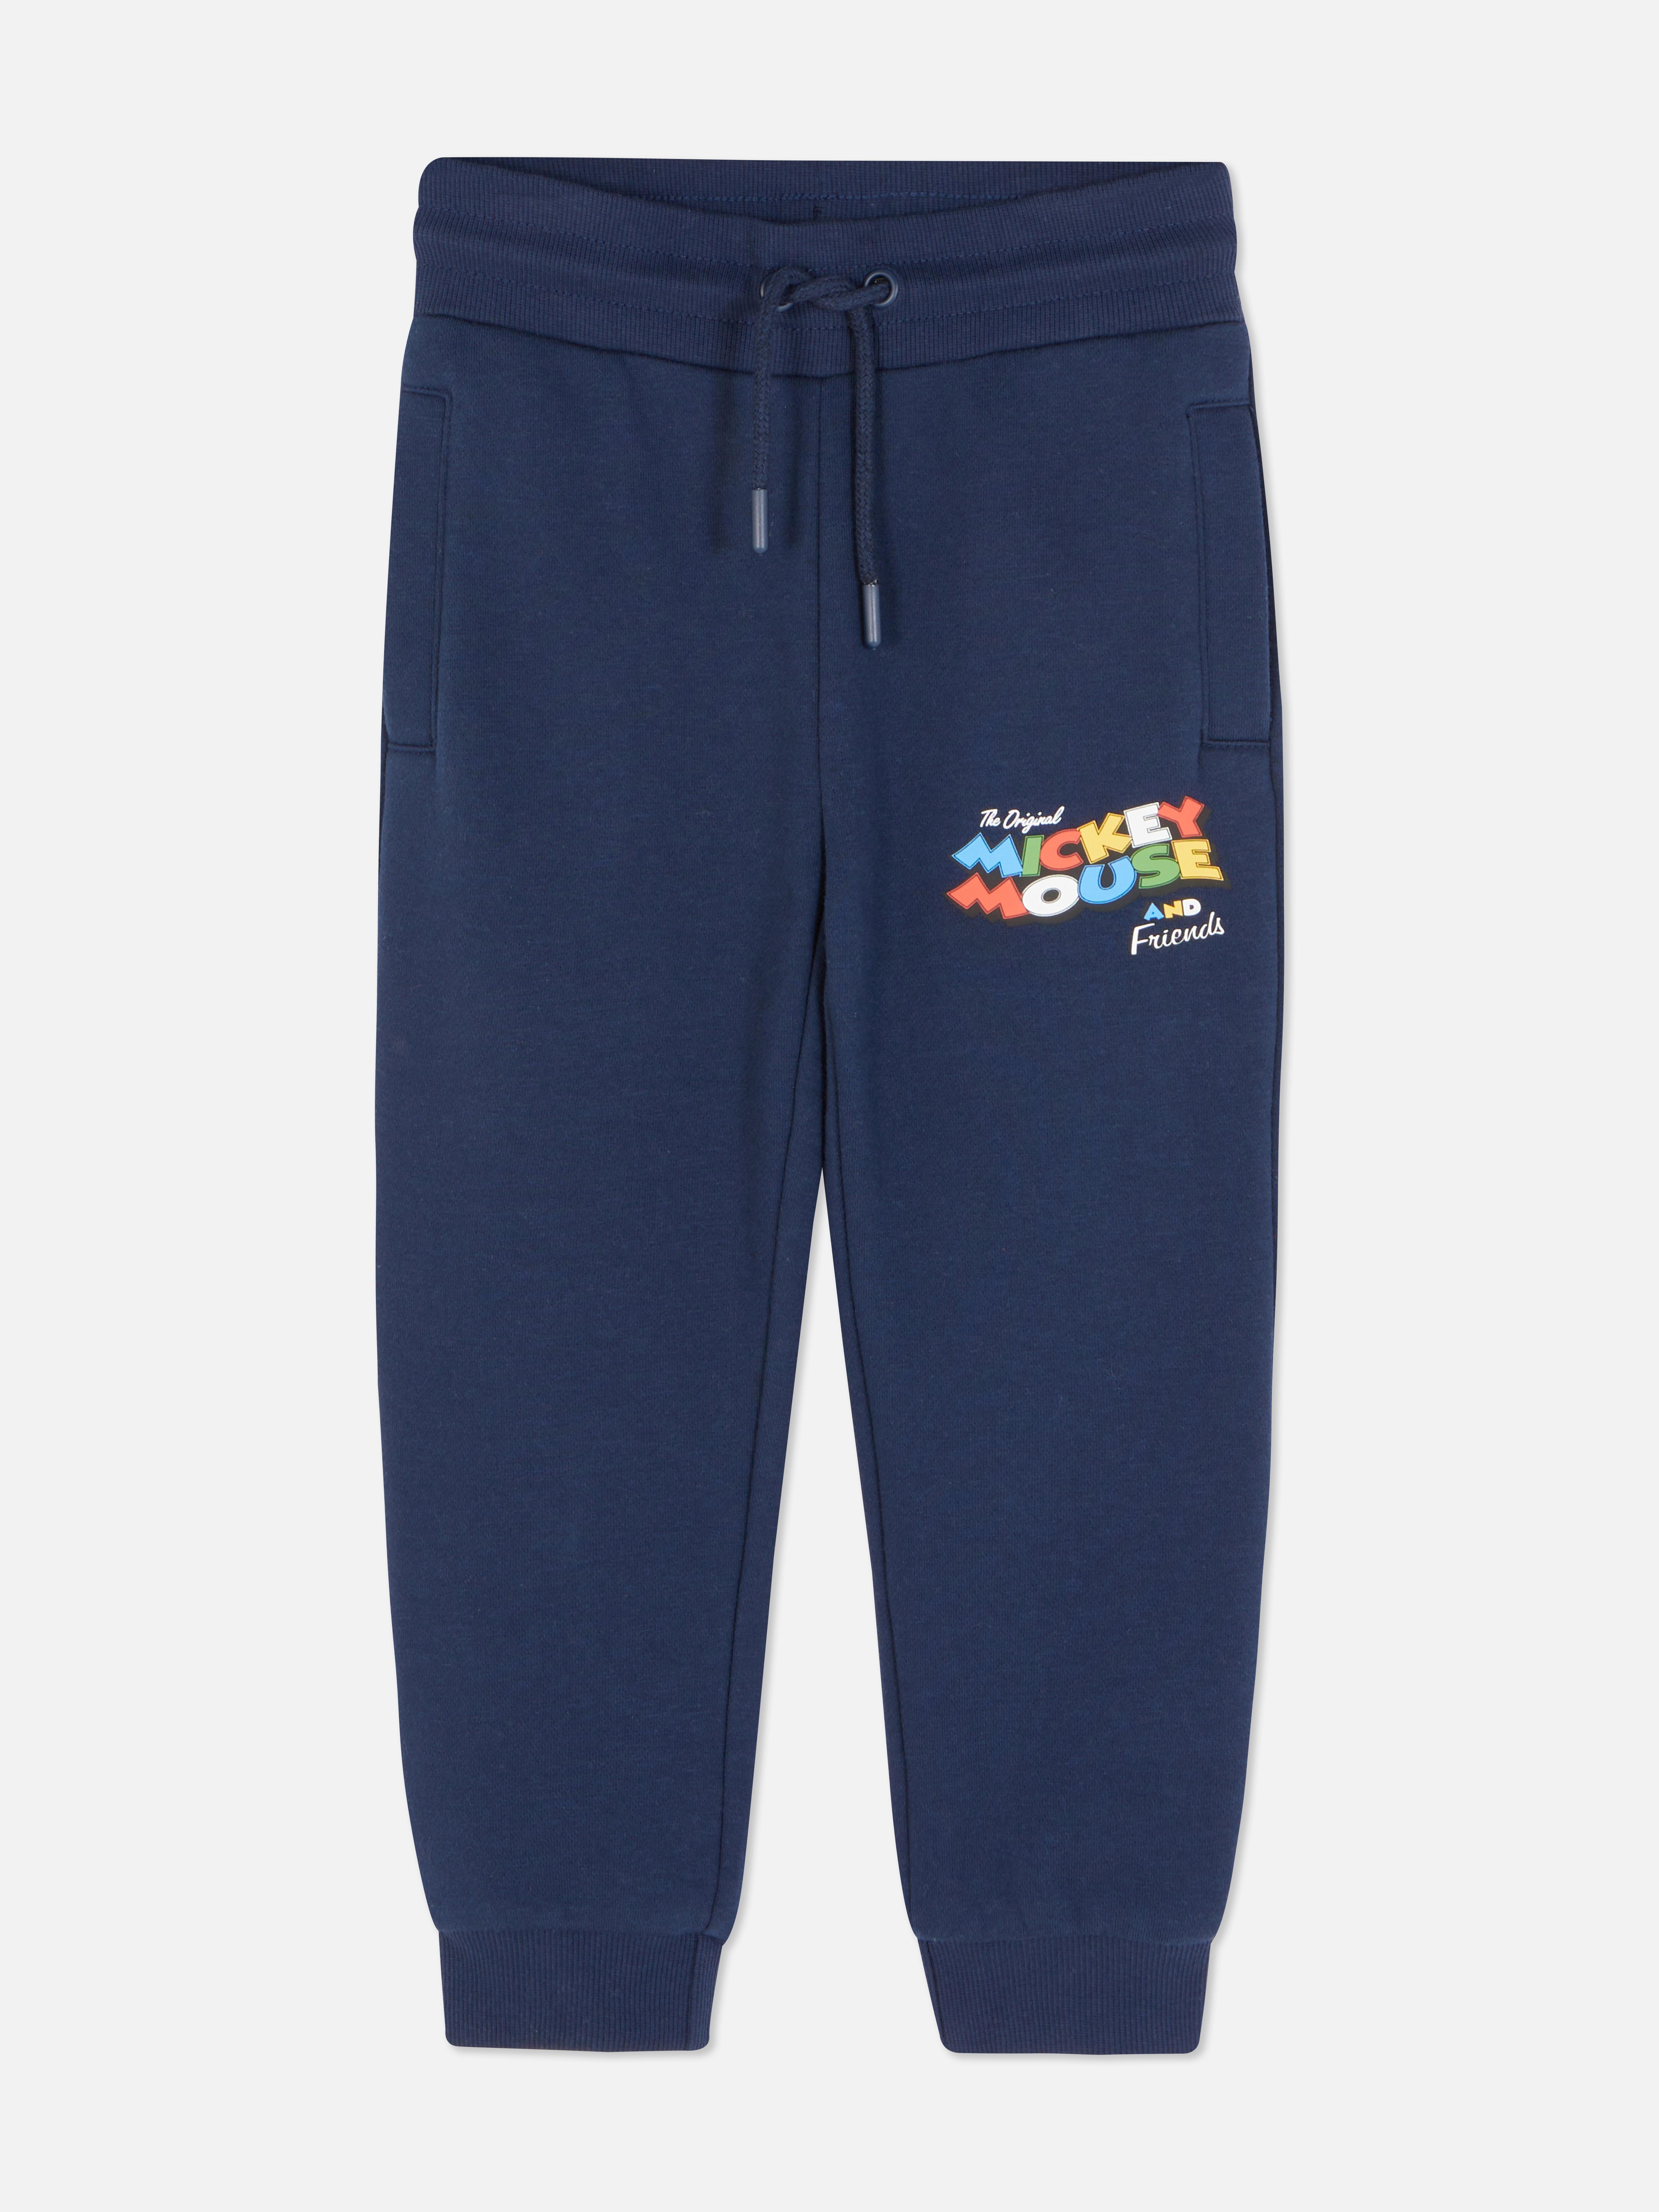 Disney’s Mickey Mouse & Friends Joggers